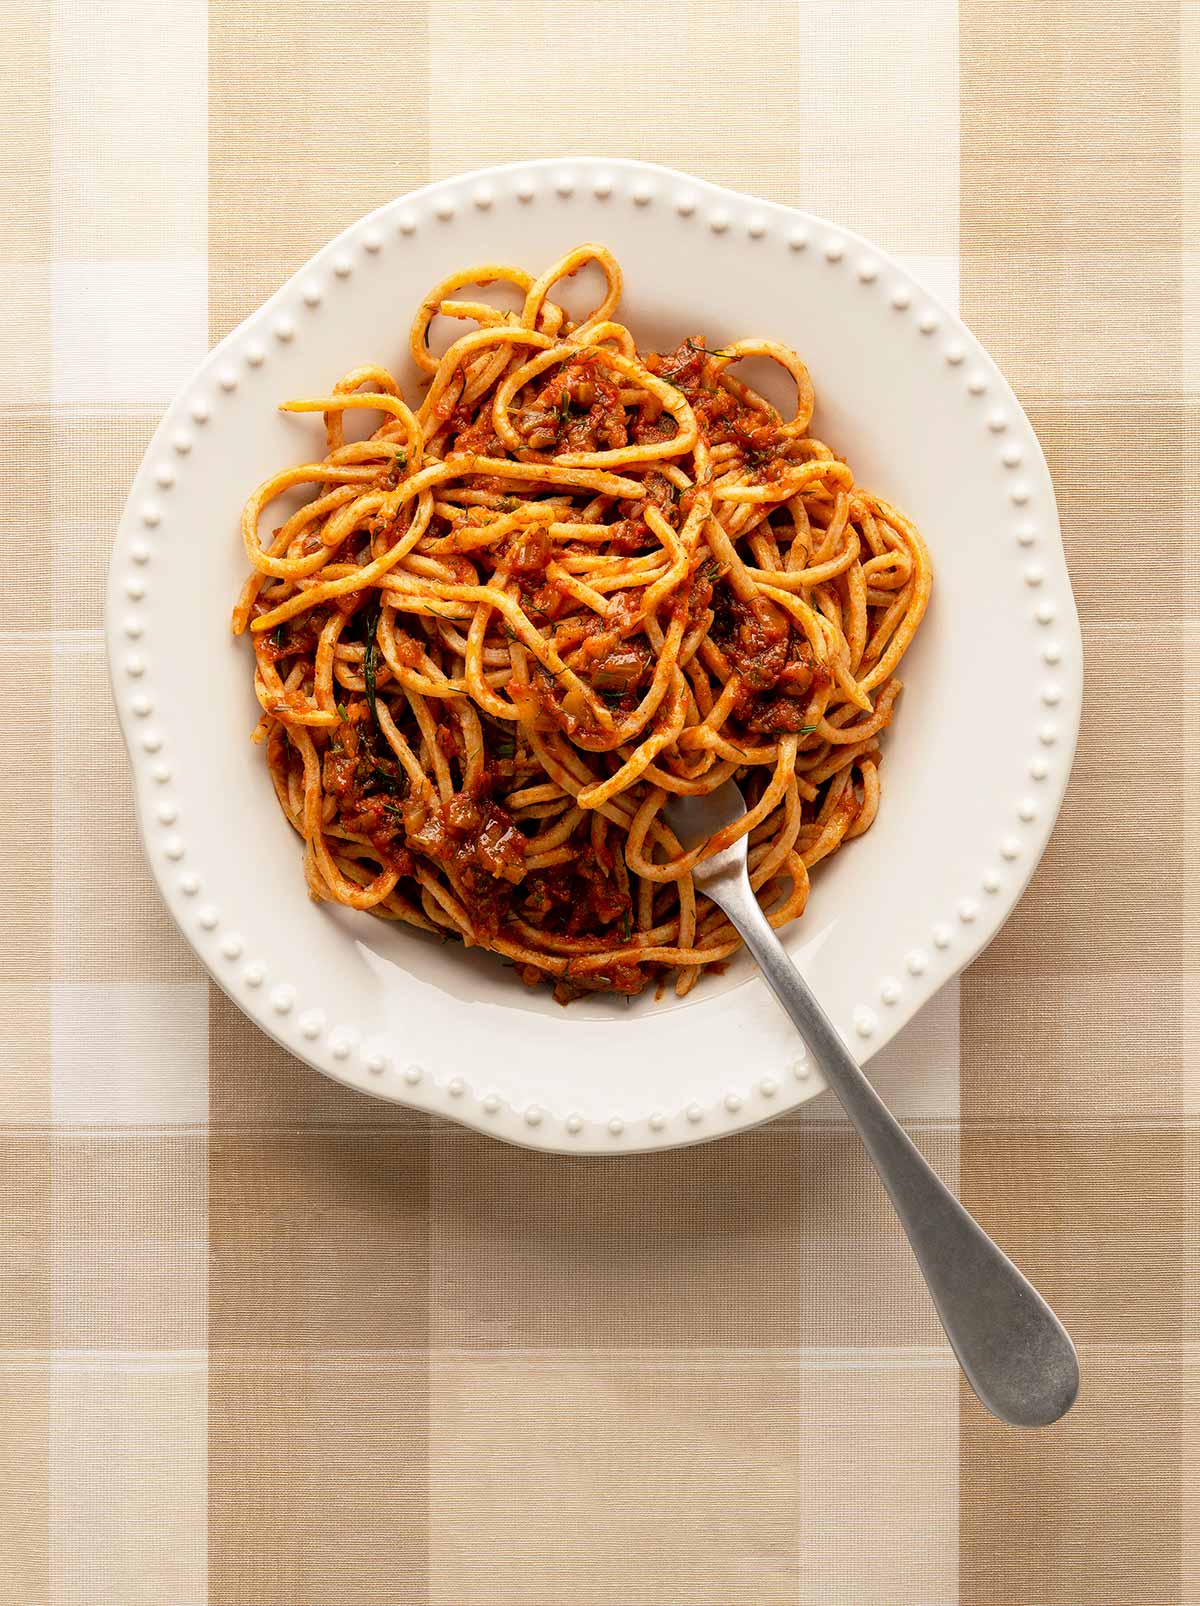 Meatless spaghetti sauce with pasta in a bowl